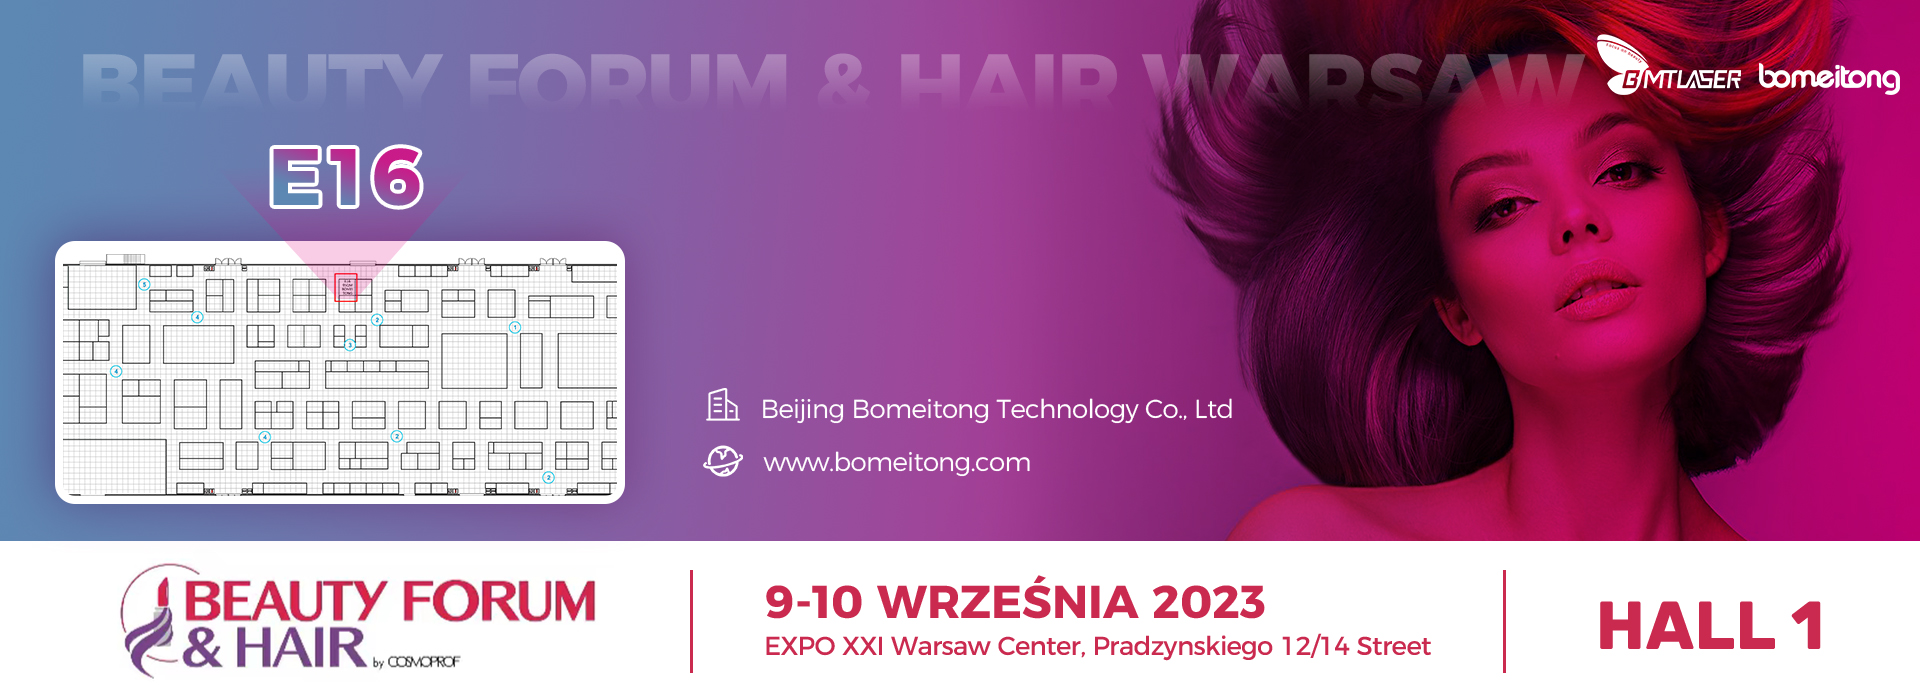 Invitation to "Beauty Forum & Hair Warsaw Exhibition"